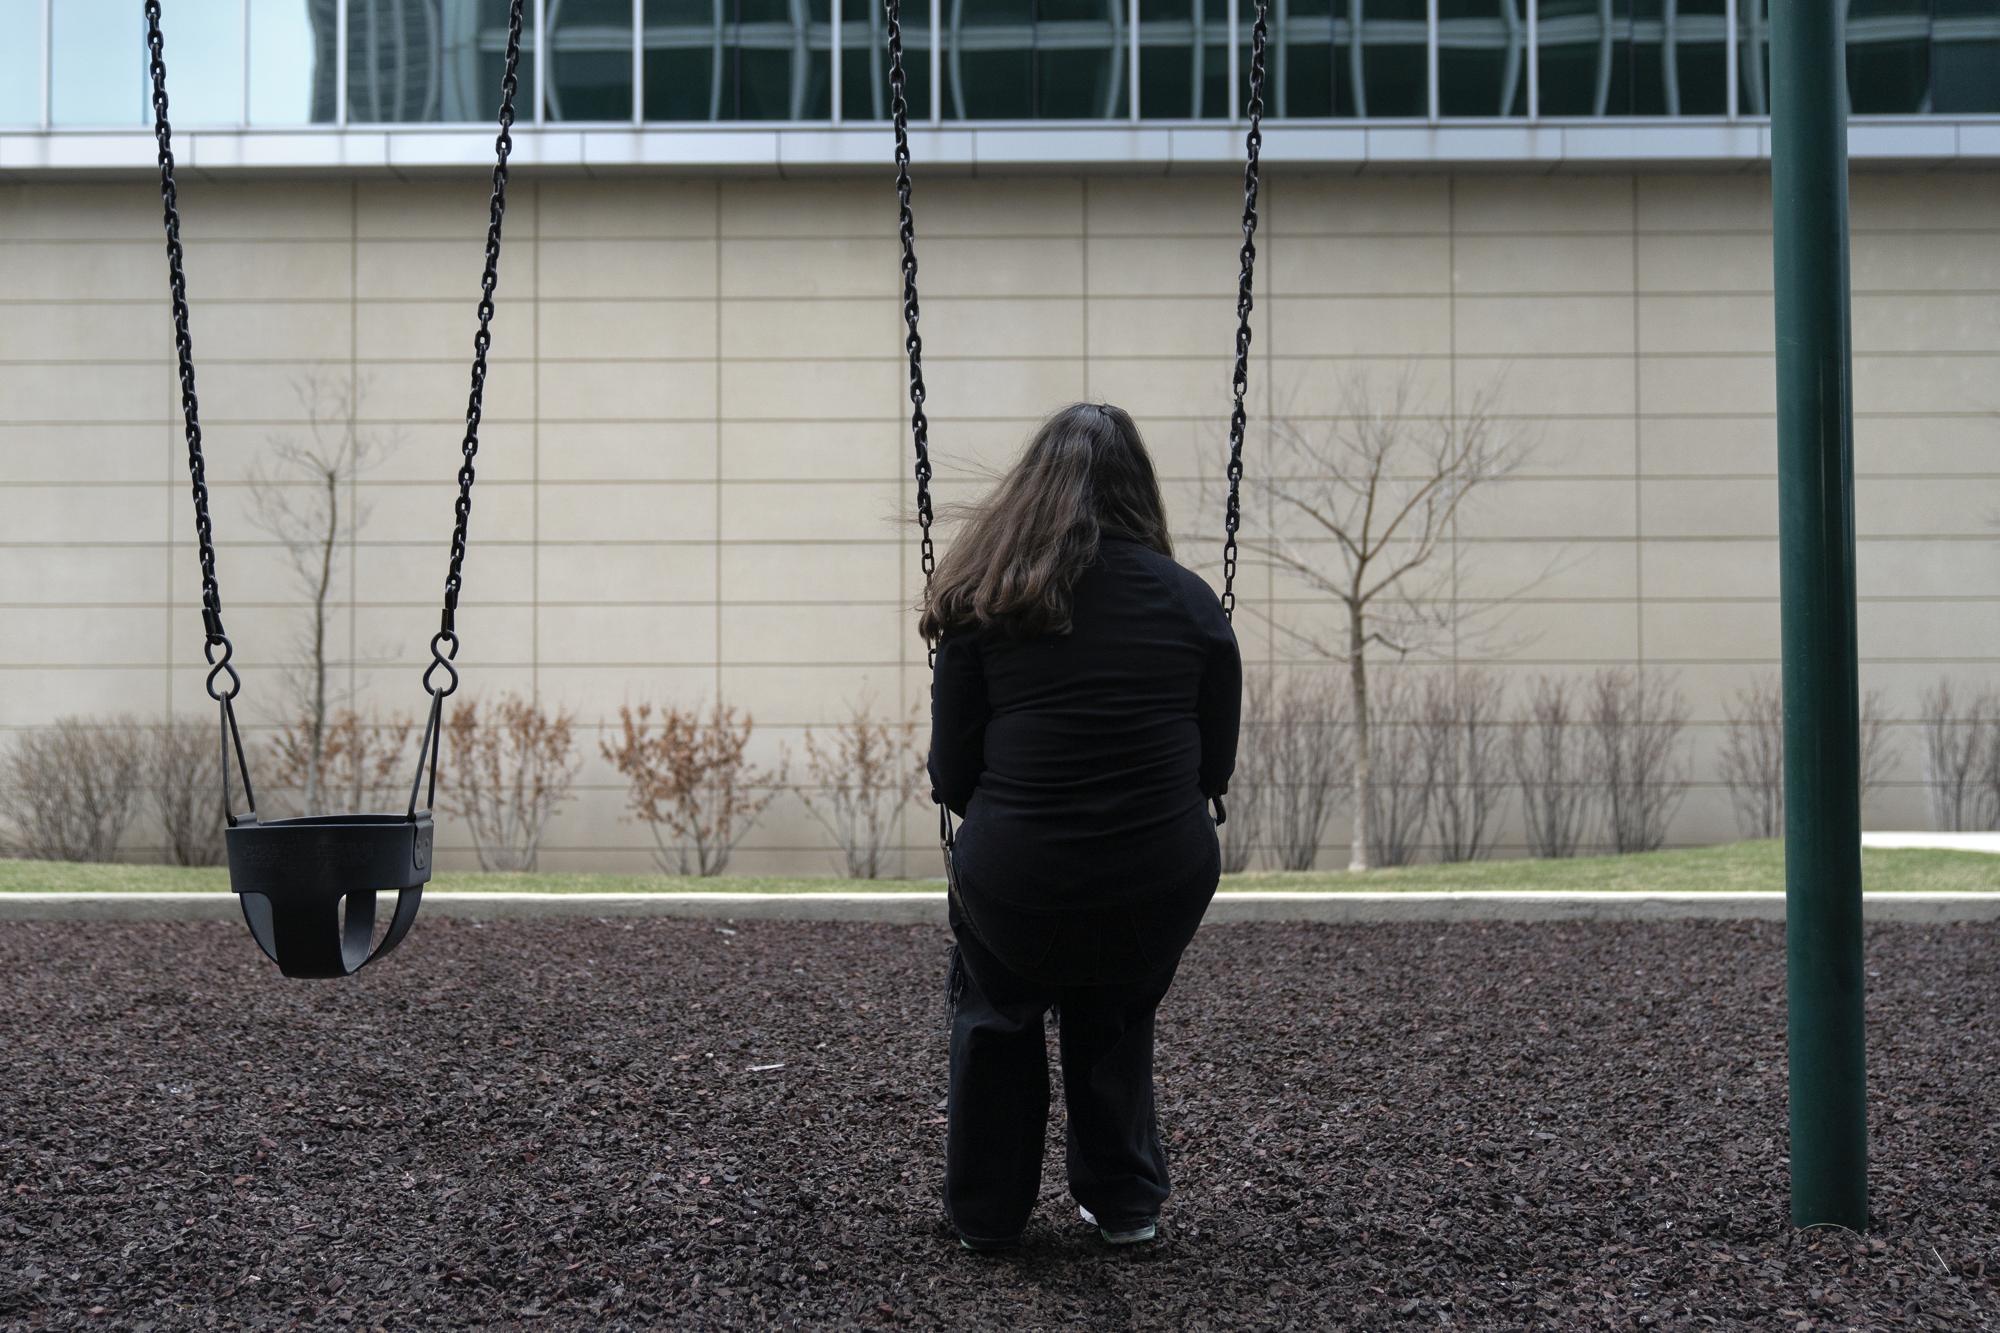 Amelia, 16, sits for a portrait in a park near her home in Illinois on Friday, March 24, 2023. “We are so strong and we go through so, so much," says the teenage girl who loves to sing and wants to be a surgeon. Amelia has also faced bullying, toxic friendships, and menacing threats from a boy at school who said she “deserved to be raped." (AP Photo Erin Hooley)